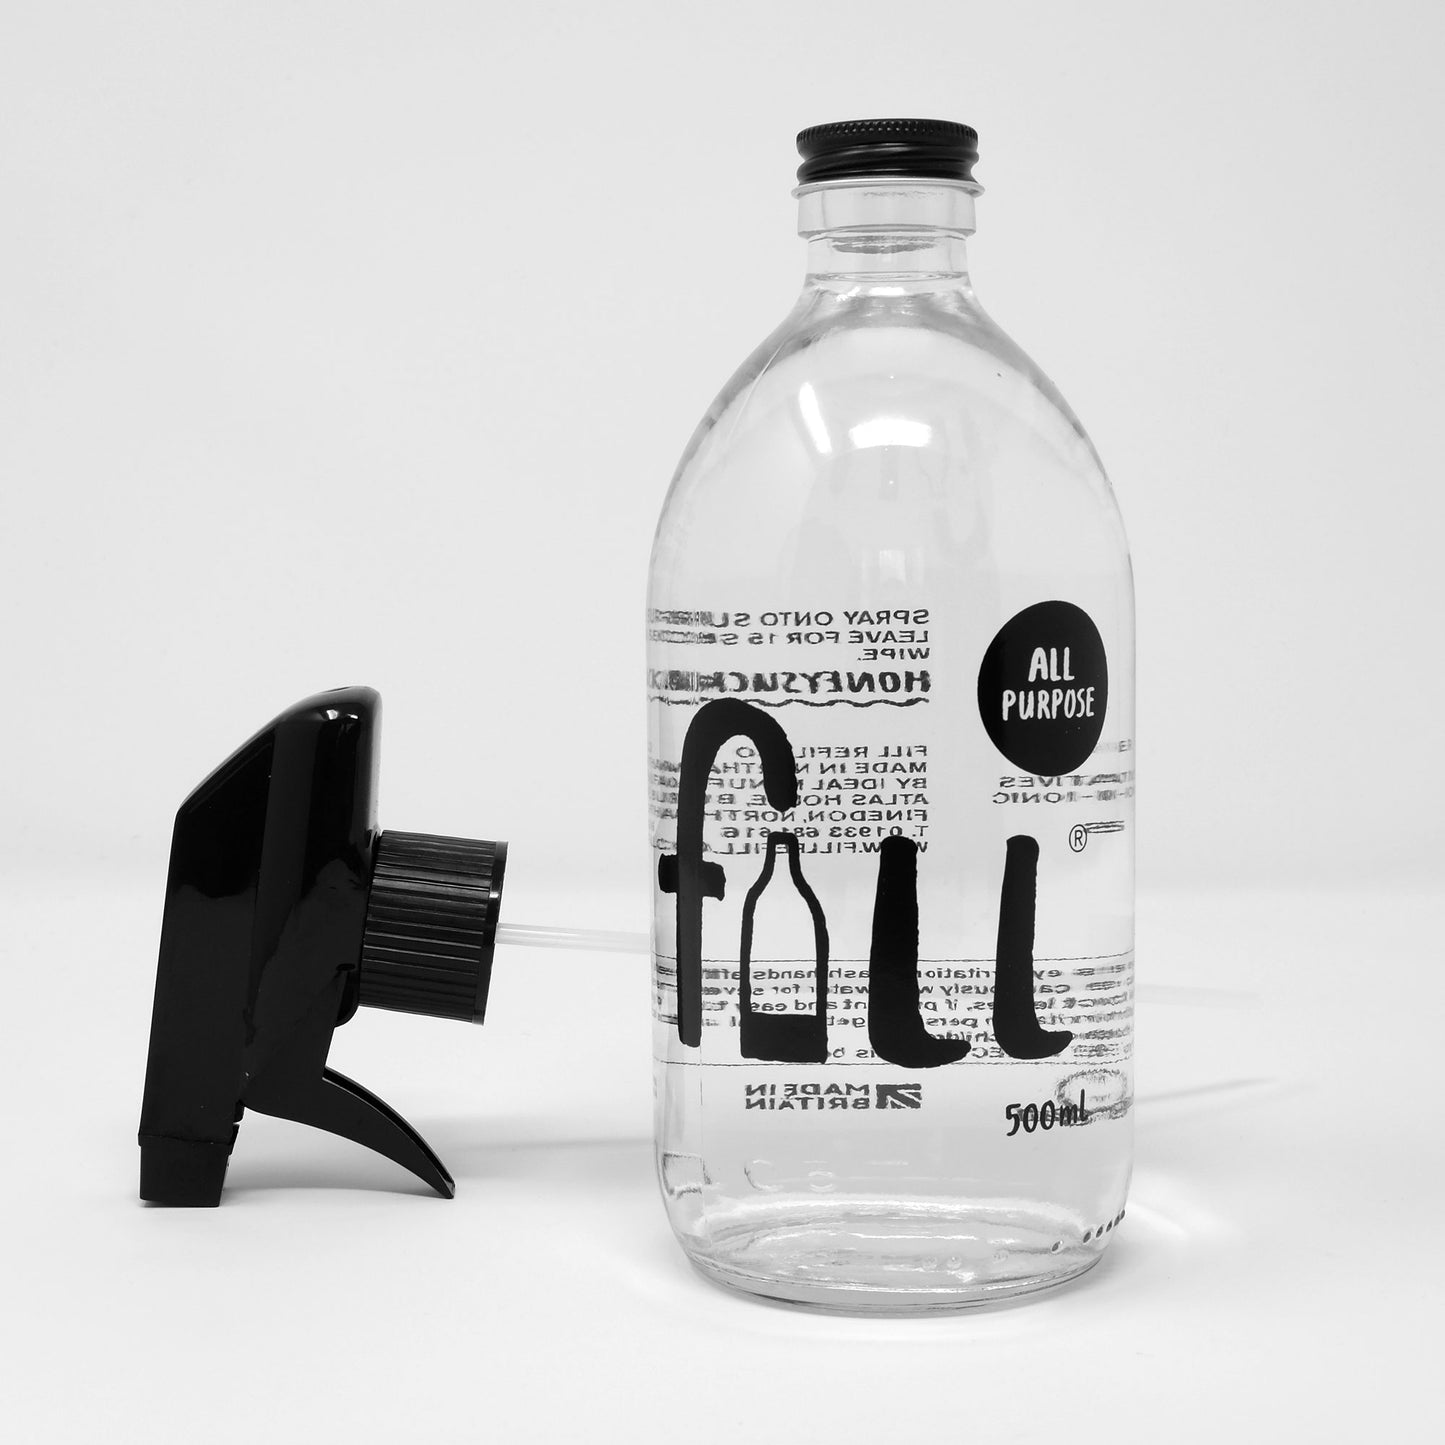 All Purpose Clean 500ml Clear Glass Bottle